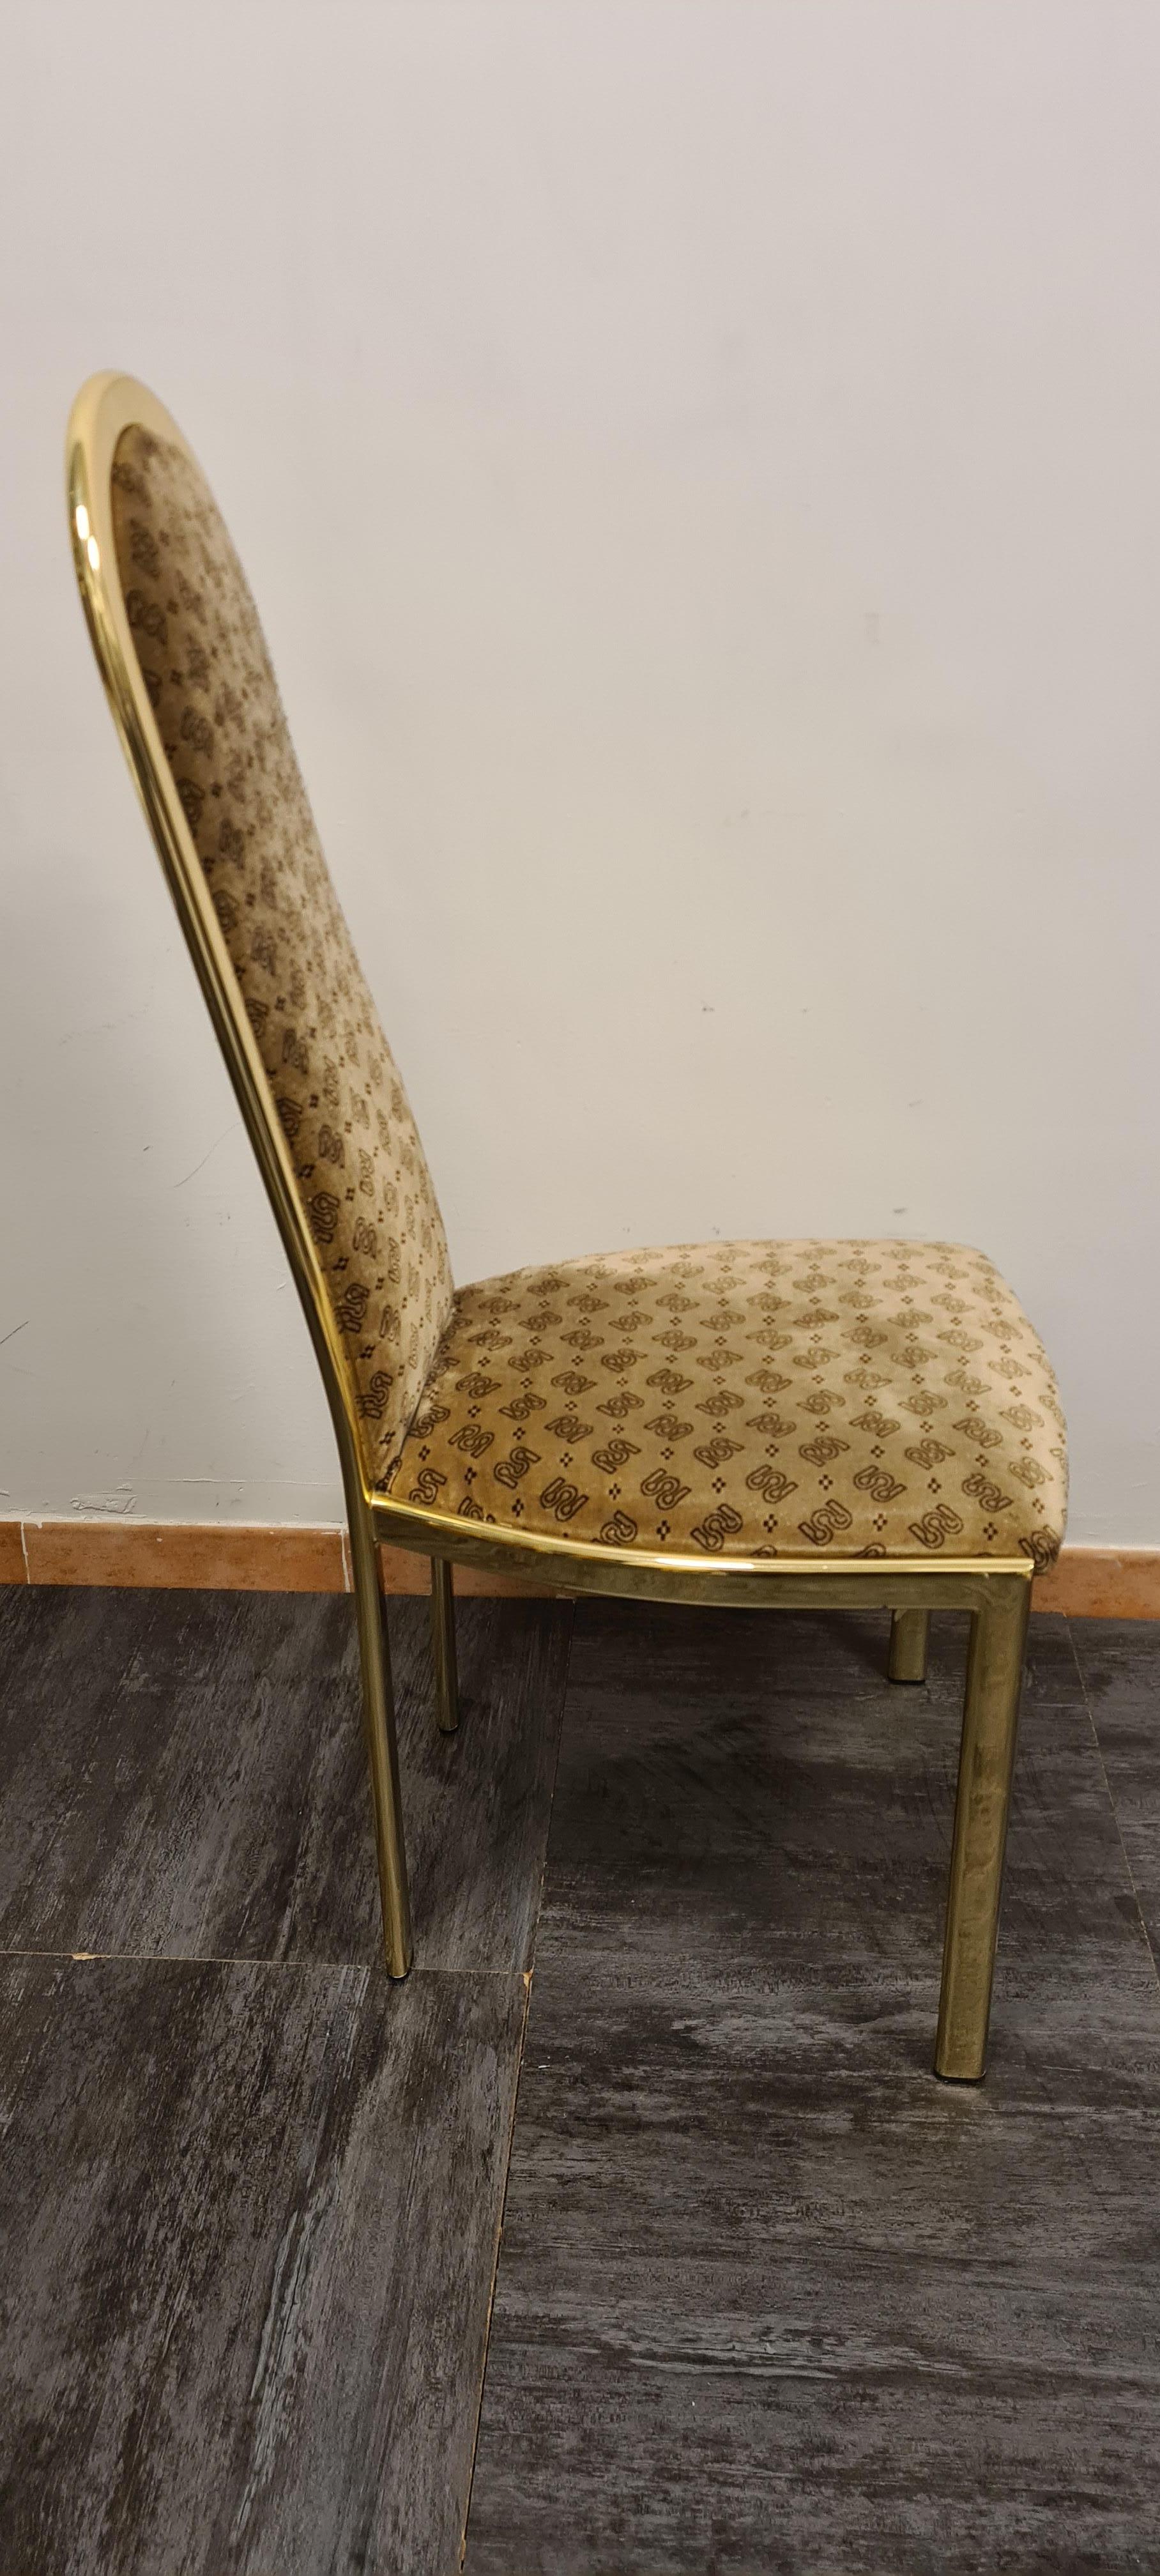 Metal 1970s gilded chairs from the Morex company